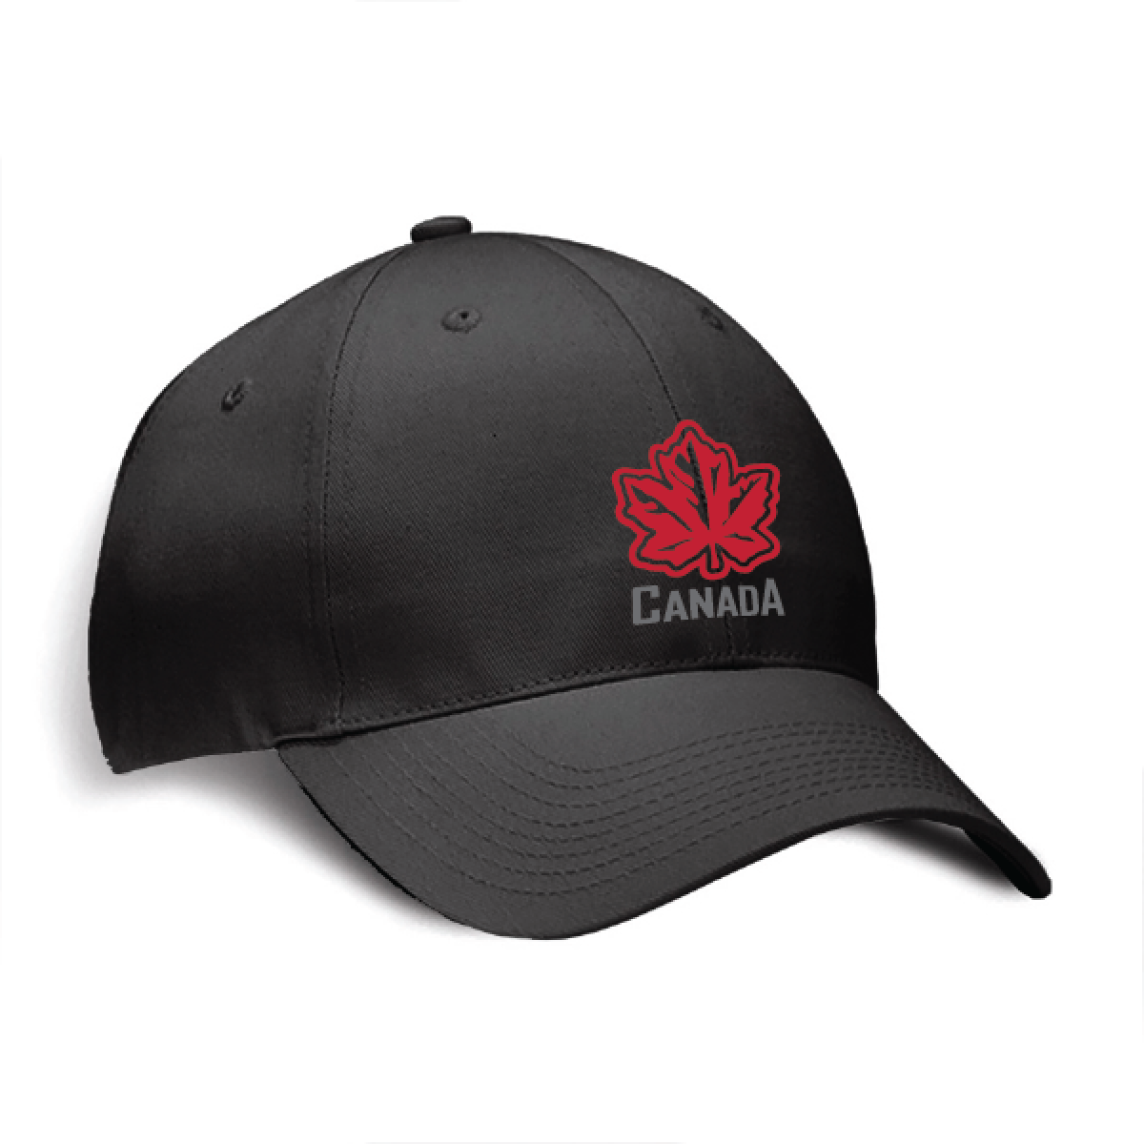 OCG Maple Leaf Canada embroidered on Classic Adjustable Ball Cap